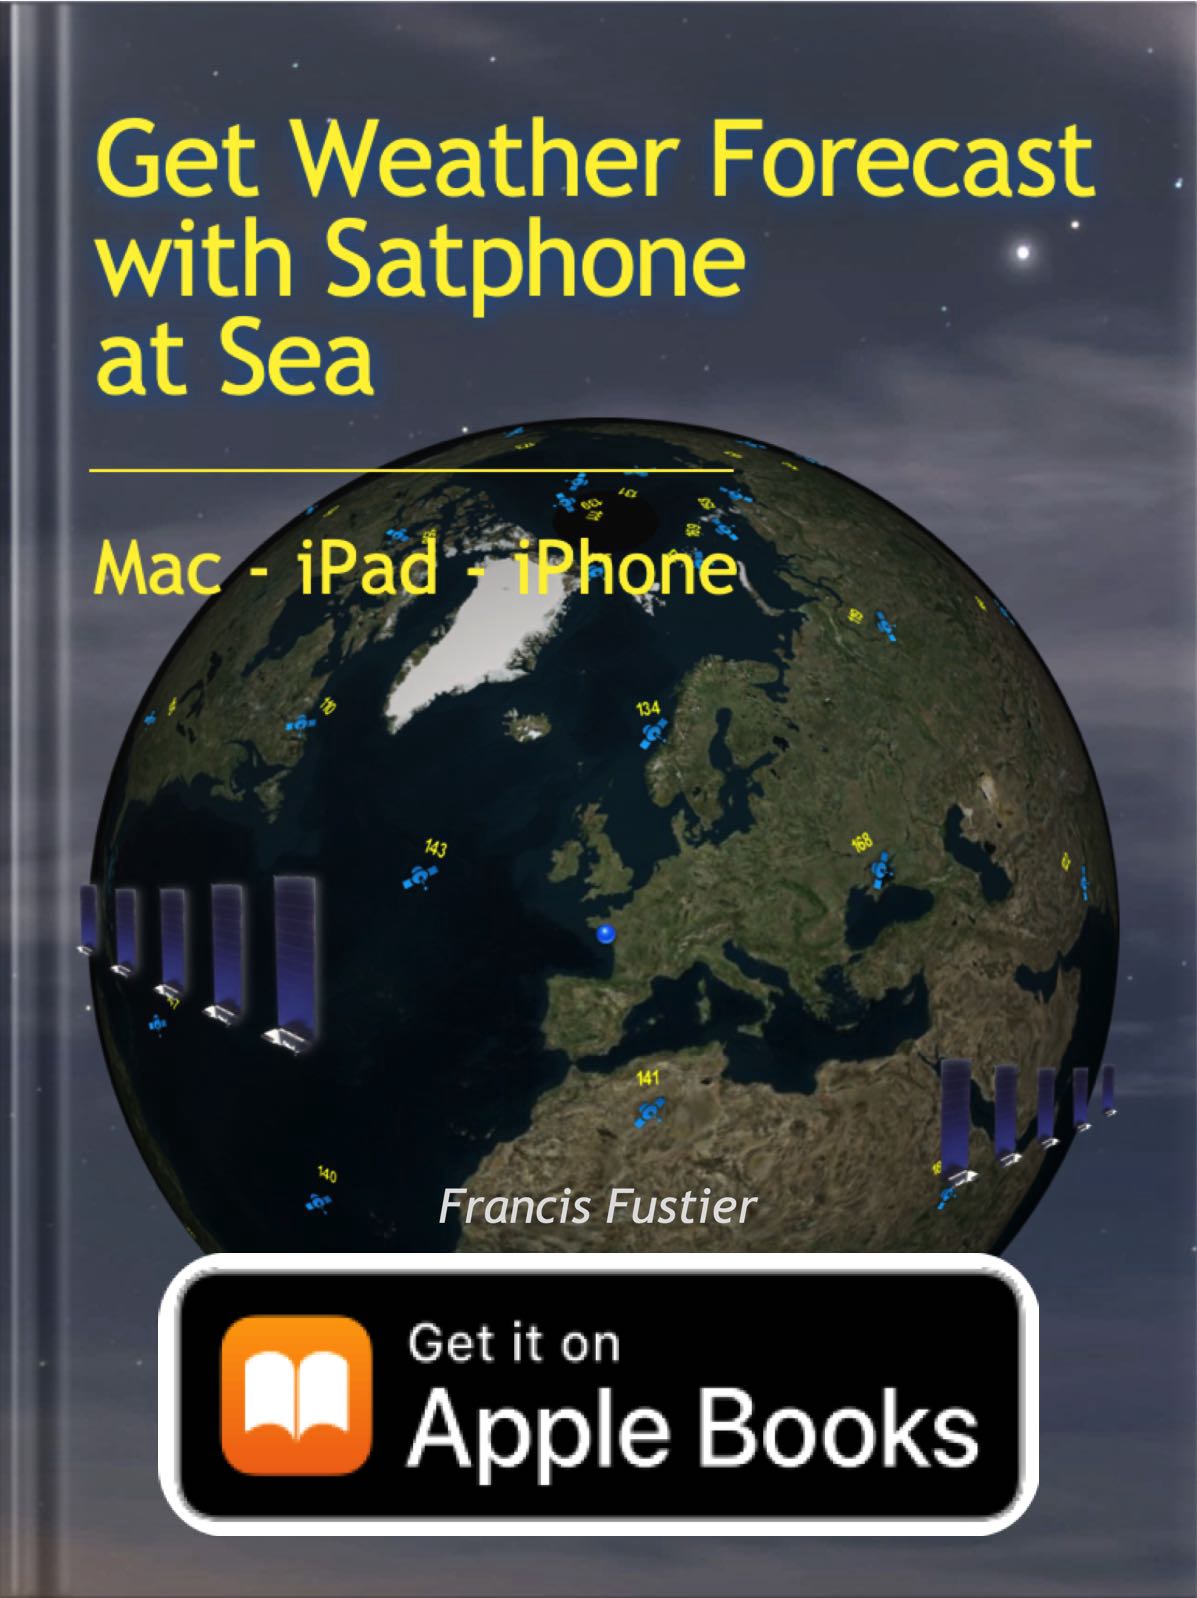 Get weather forecast with satphone at sea